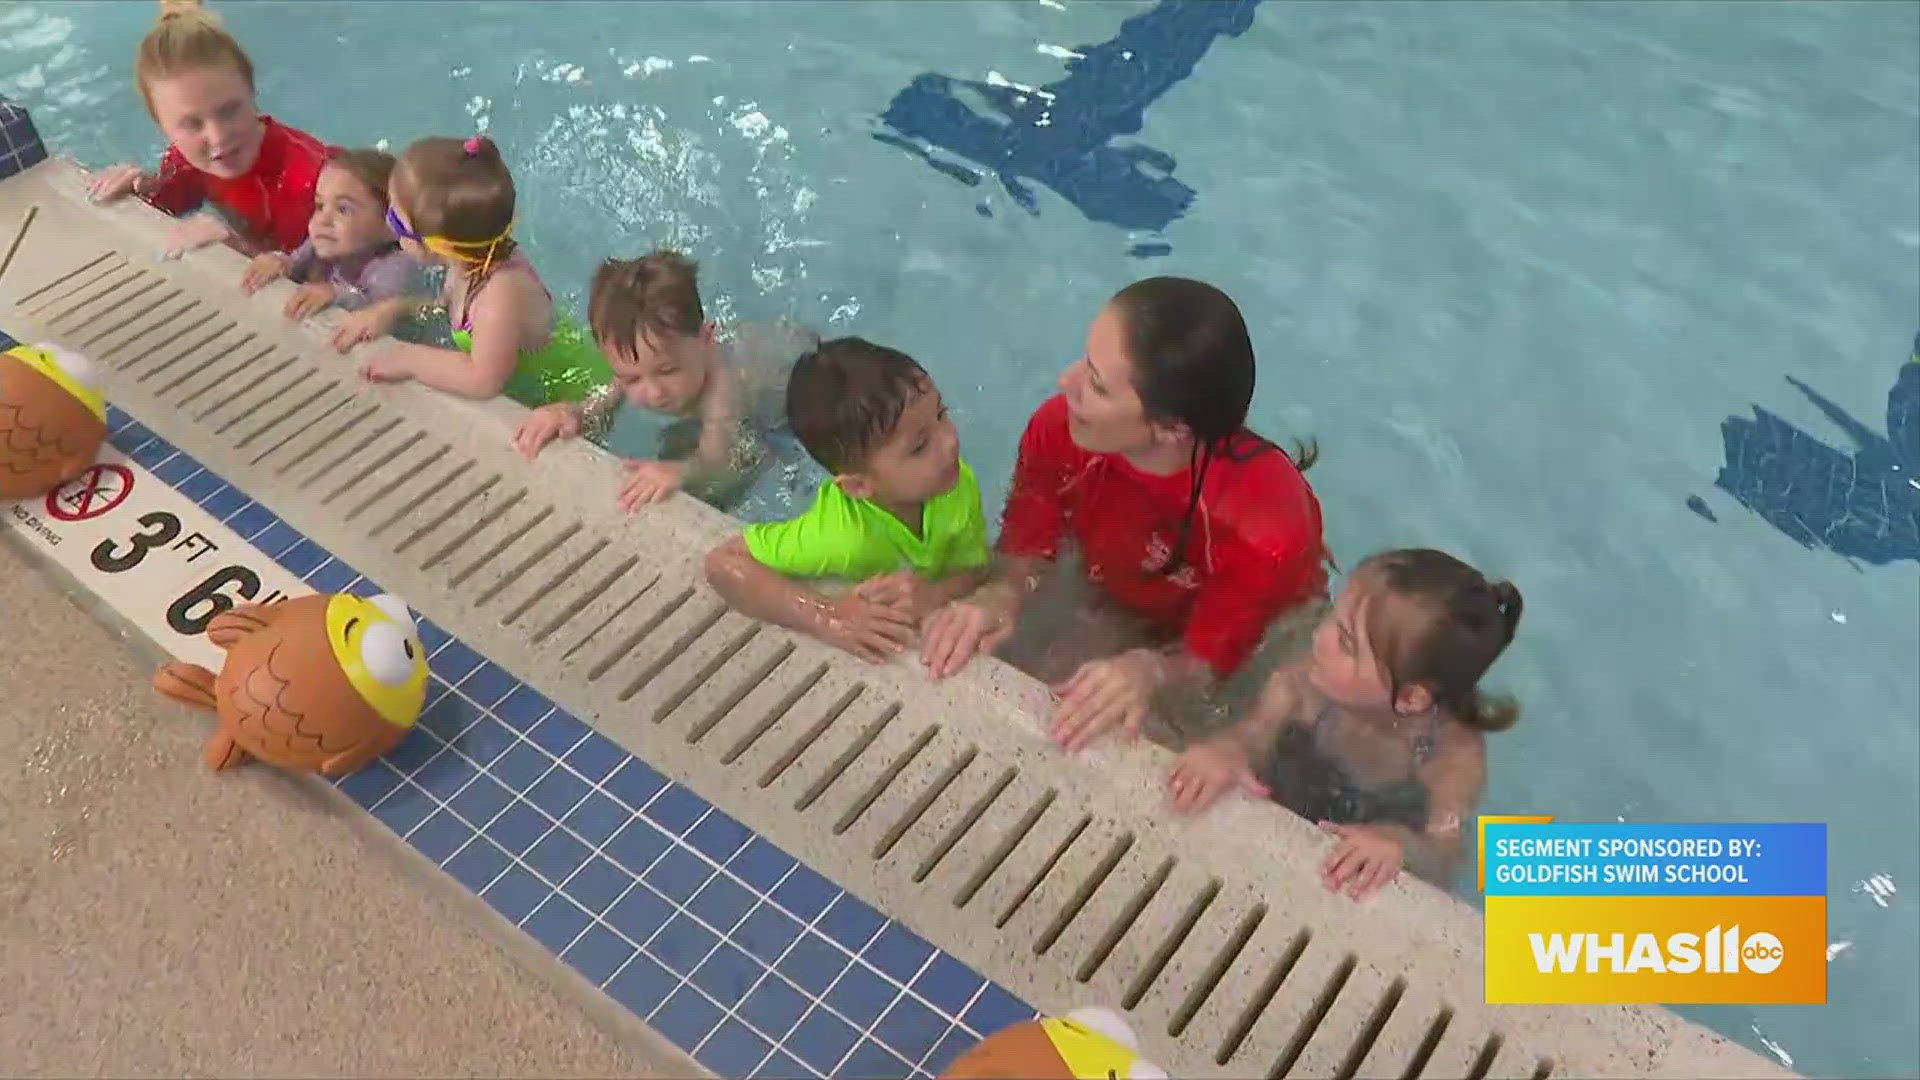 Goldfish Swim School discusses important tips for water safety and shows how they help children learn how to swim.